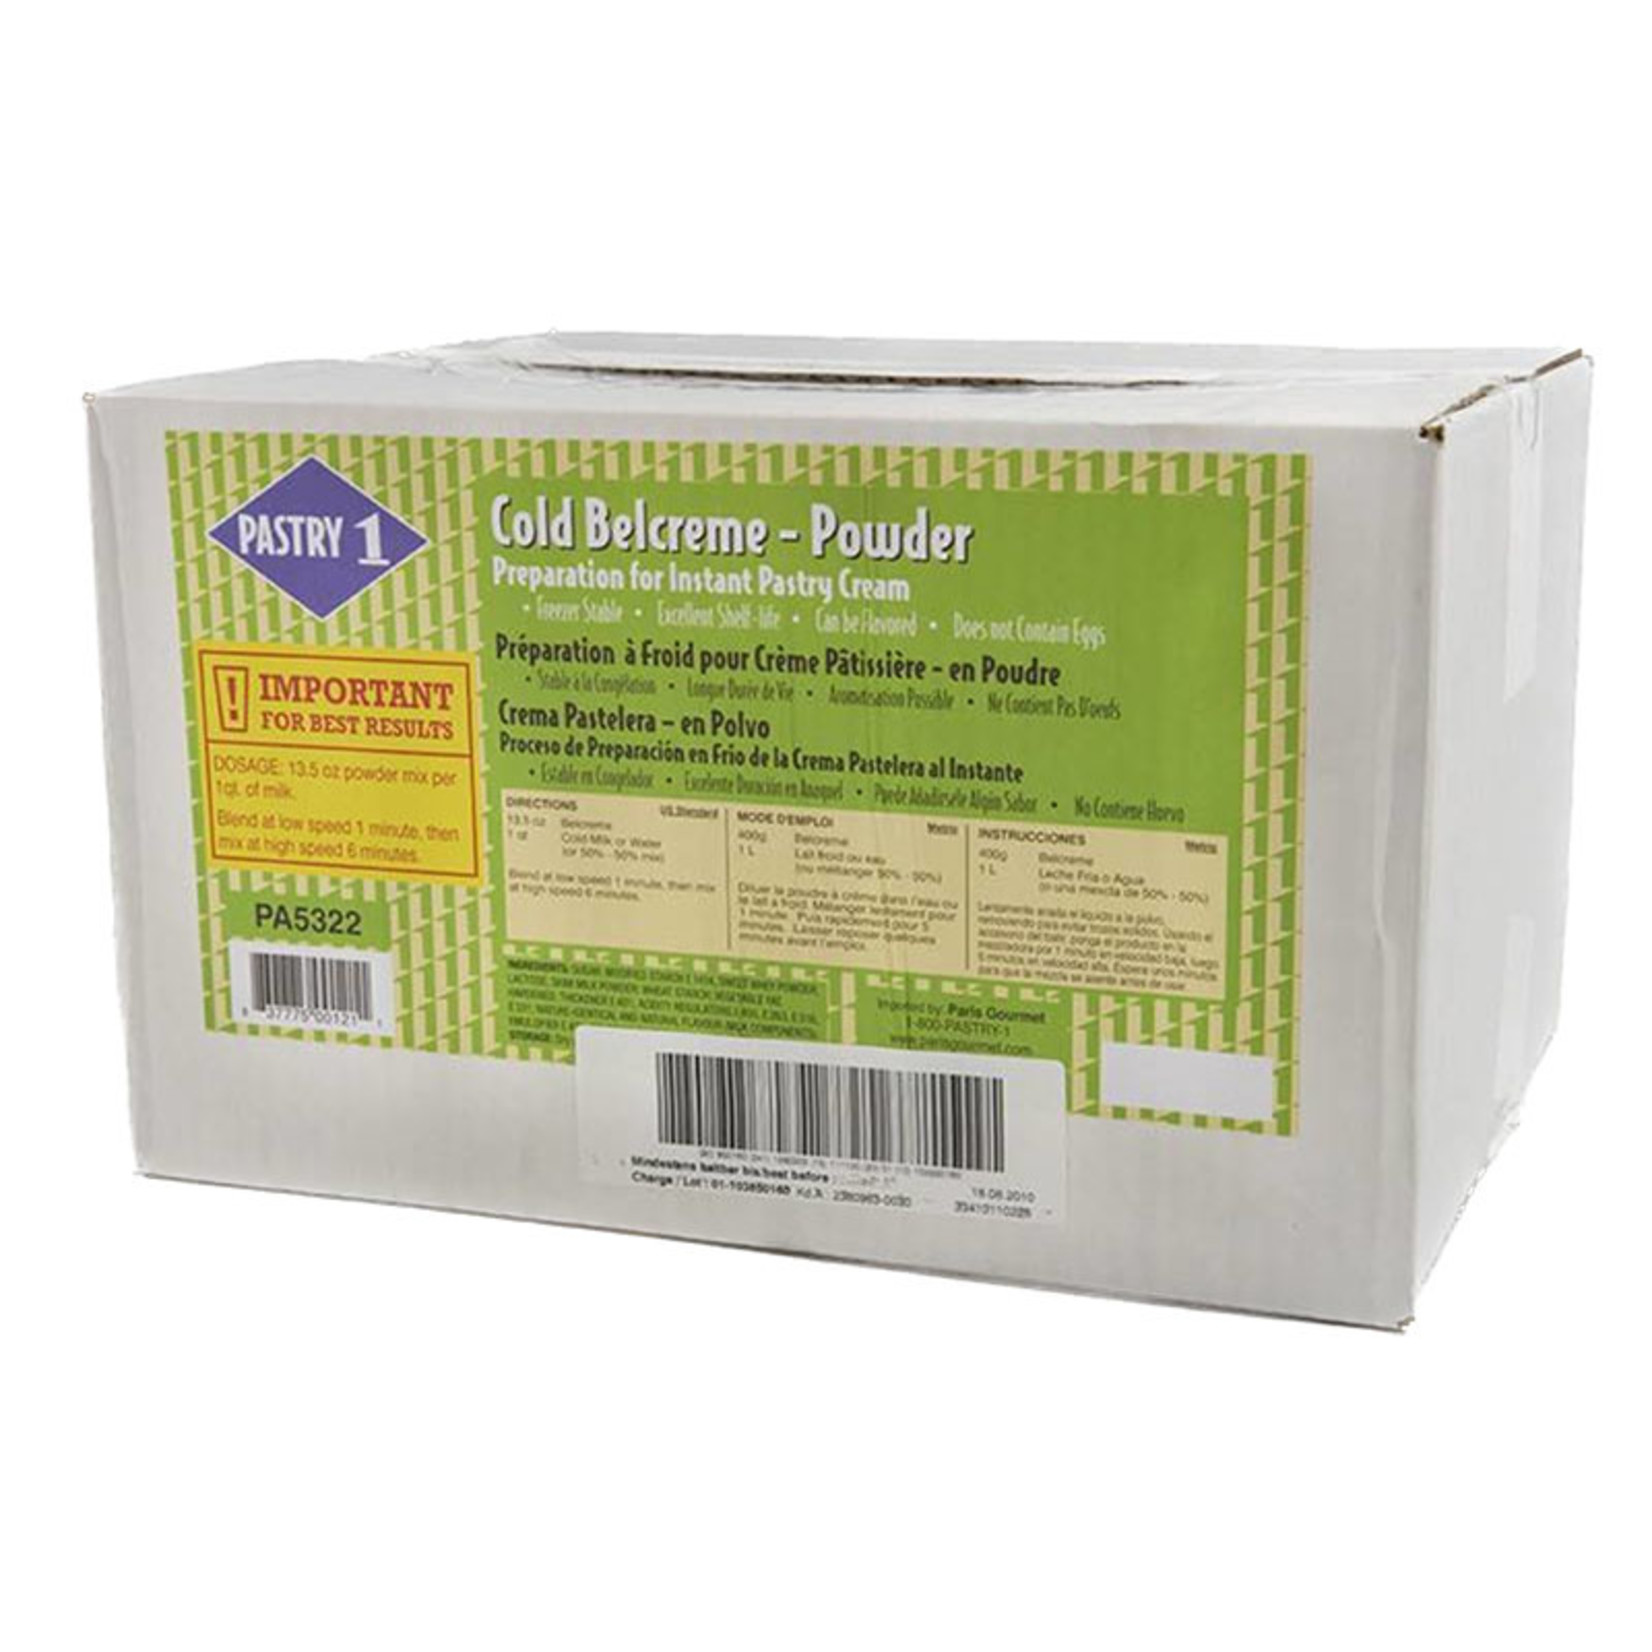 Pastry 1 Pastry 1 - Cold Process Pastry Cream Mix - 11 lb